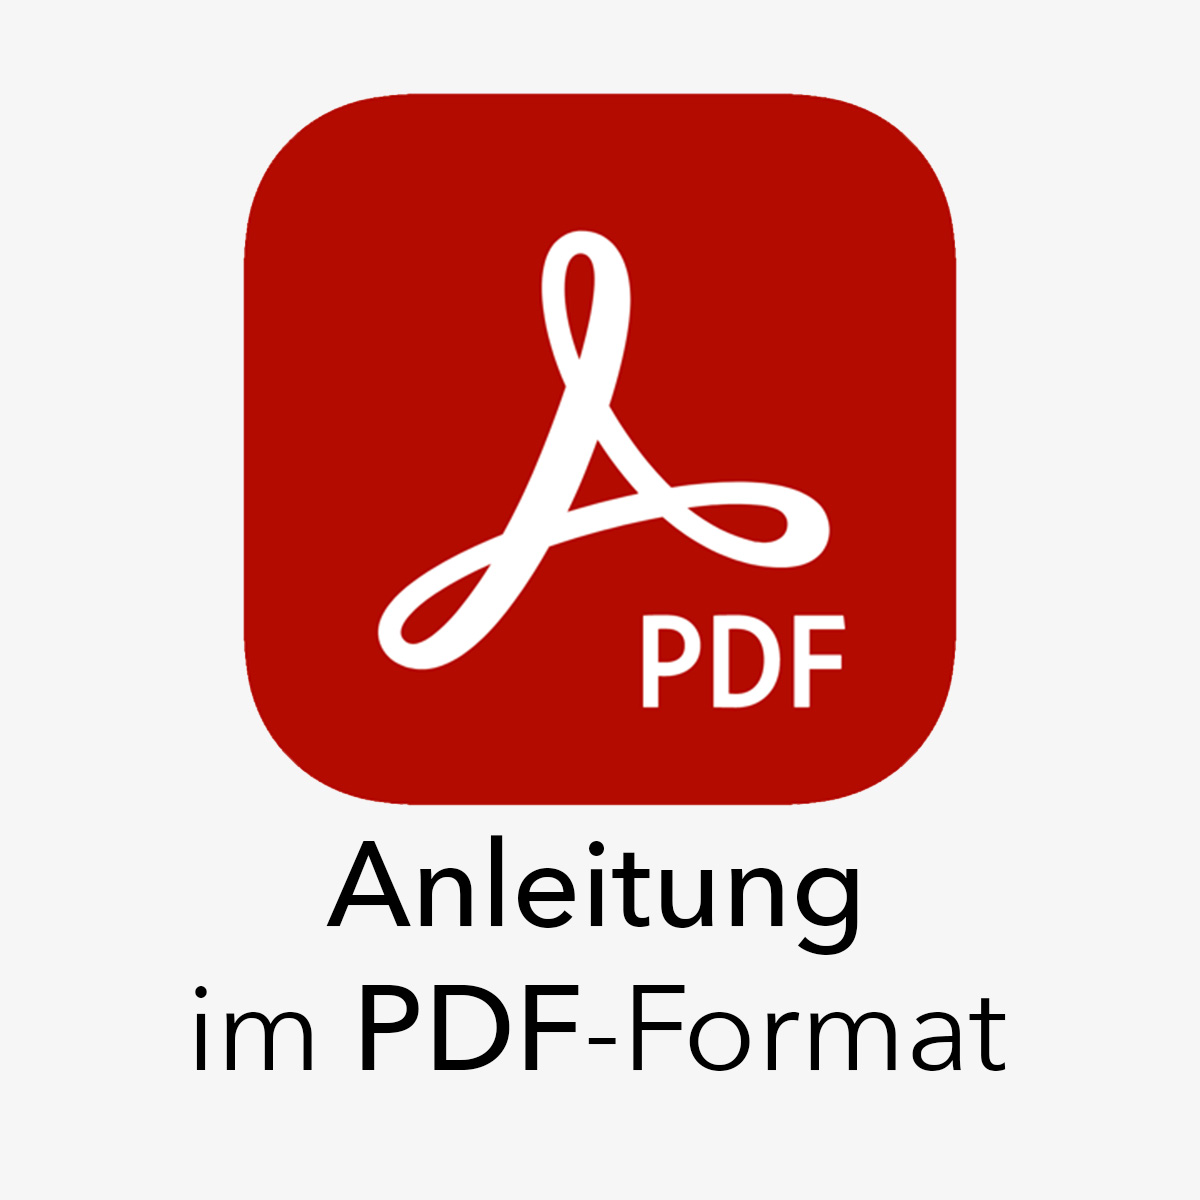  Instructions as PDF file 

 The instructions as PDF file are available for download in your customer account after purchasing the product. The download will be available once the order is marked as paid. You can find the file in your  customer account  under “ My Downloads ”. 